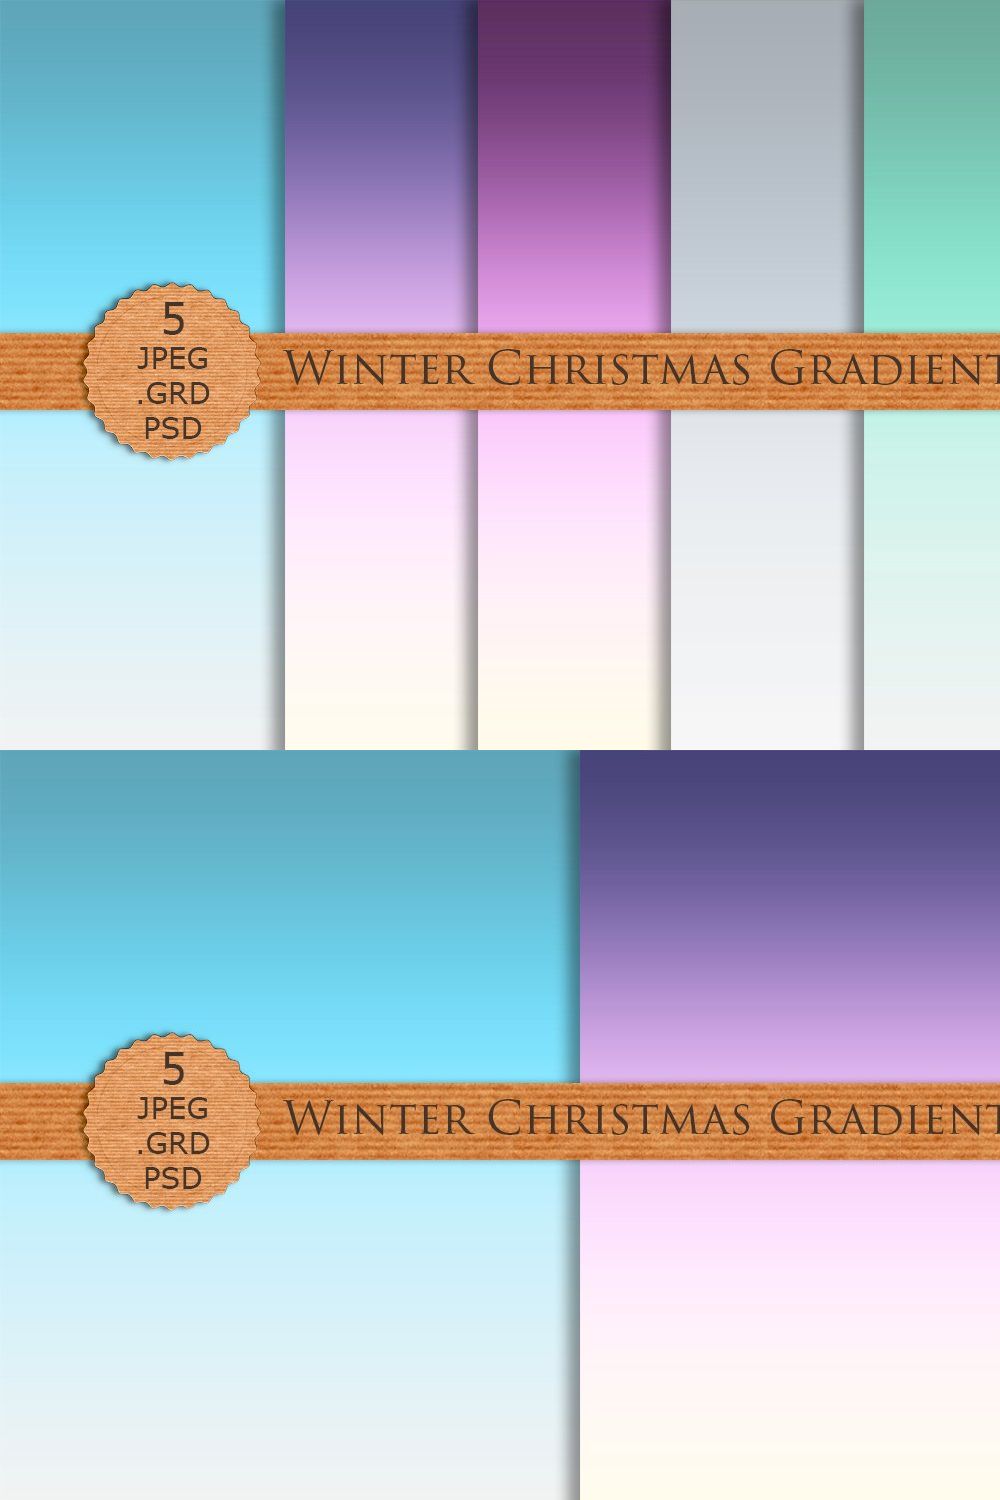 WINTER CHRISTMAS GRADIENTS Photoshop pinterest preview image.